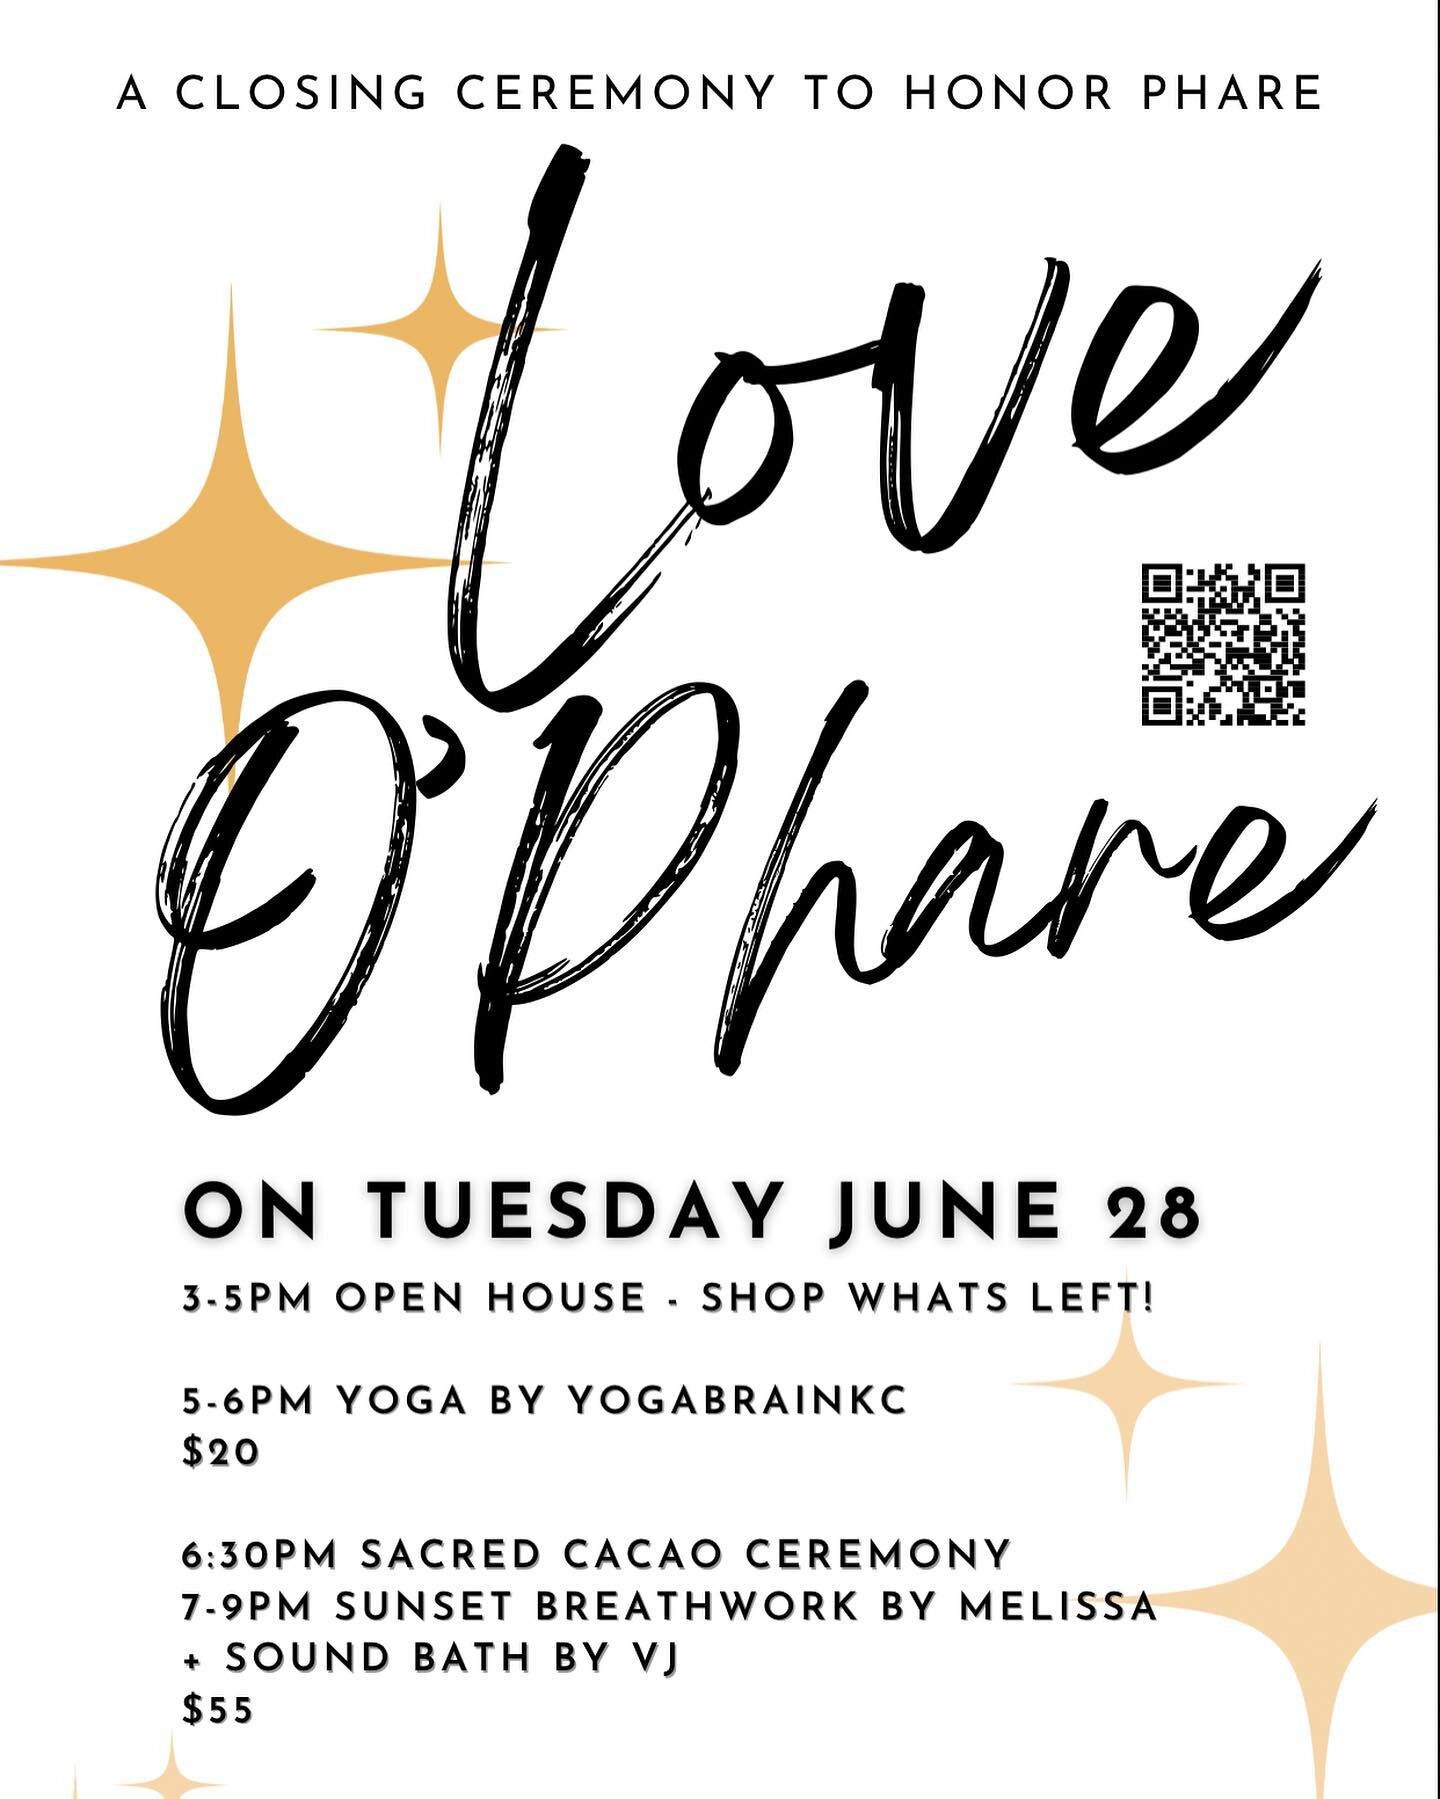 Tomorrow Phare is hosting its finale closing ceremony. A tribute and final closing to honor the consciousness that is Phare and the space that was held over the last 2.5 years for the community. 

🛒3-5pm - open house and &lsquo;lets make a deal&rsqu